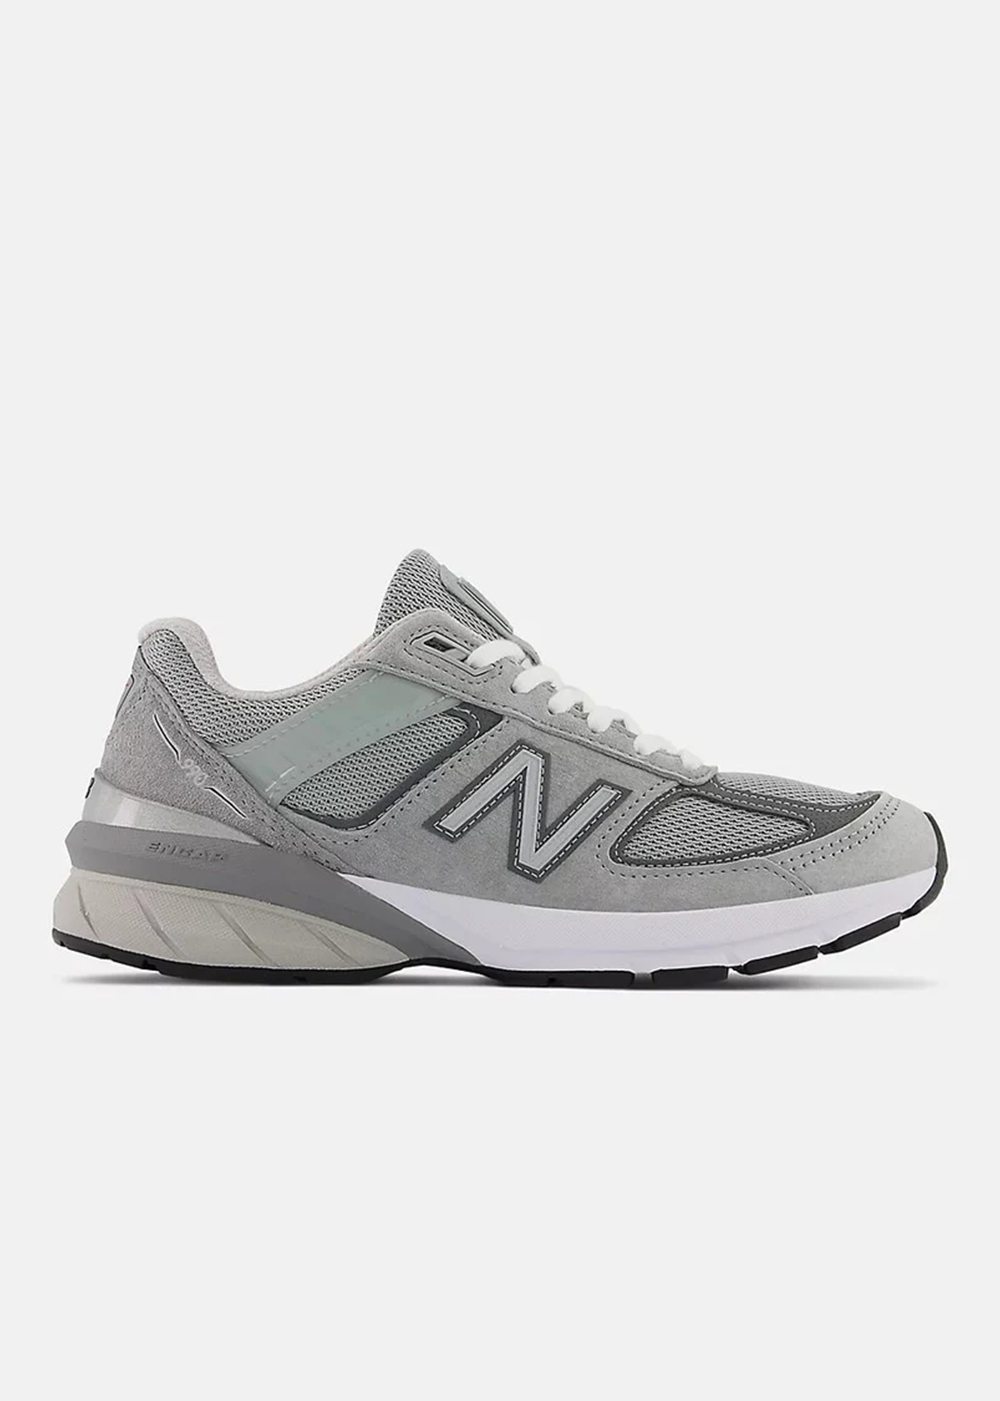 New Balance 990v5 Made in USA Sneakers - Grey